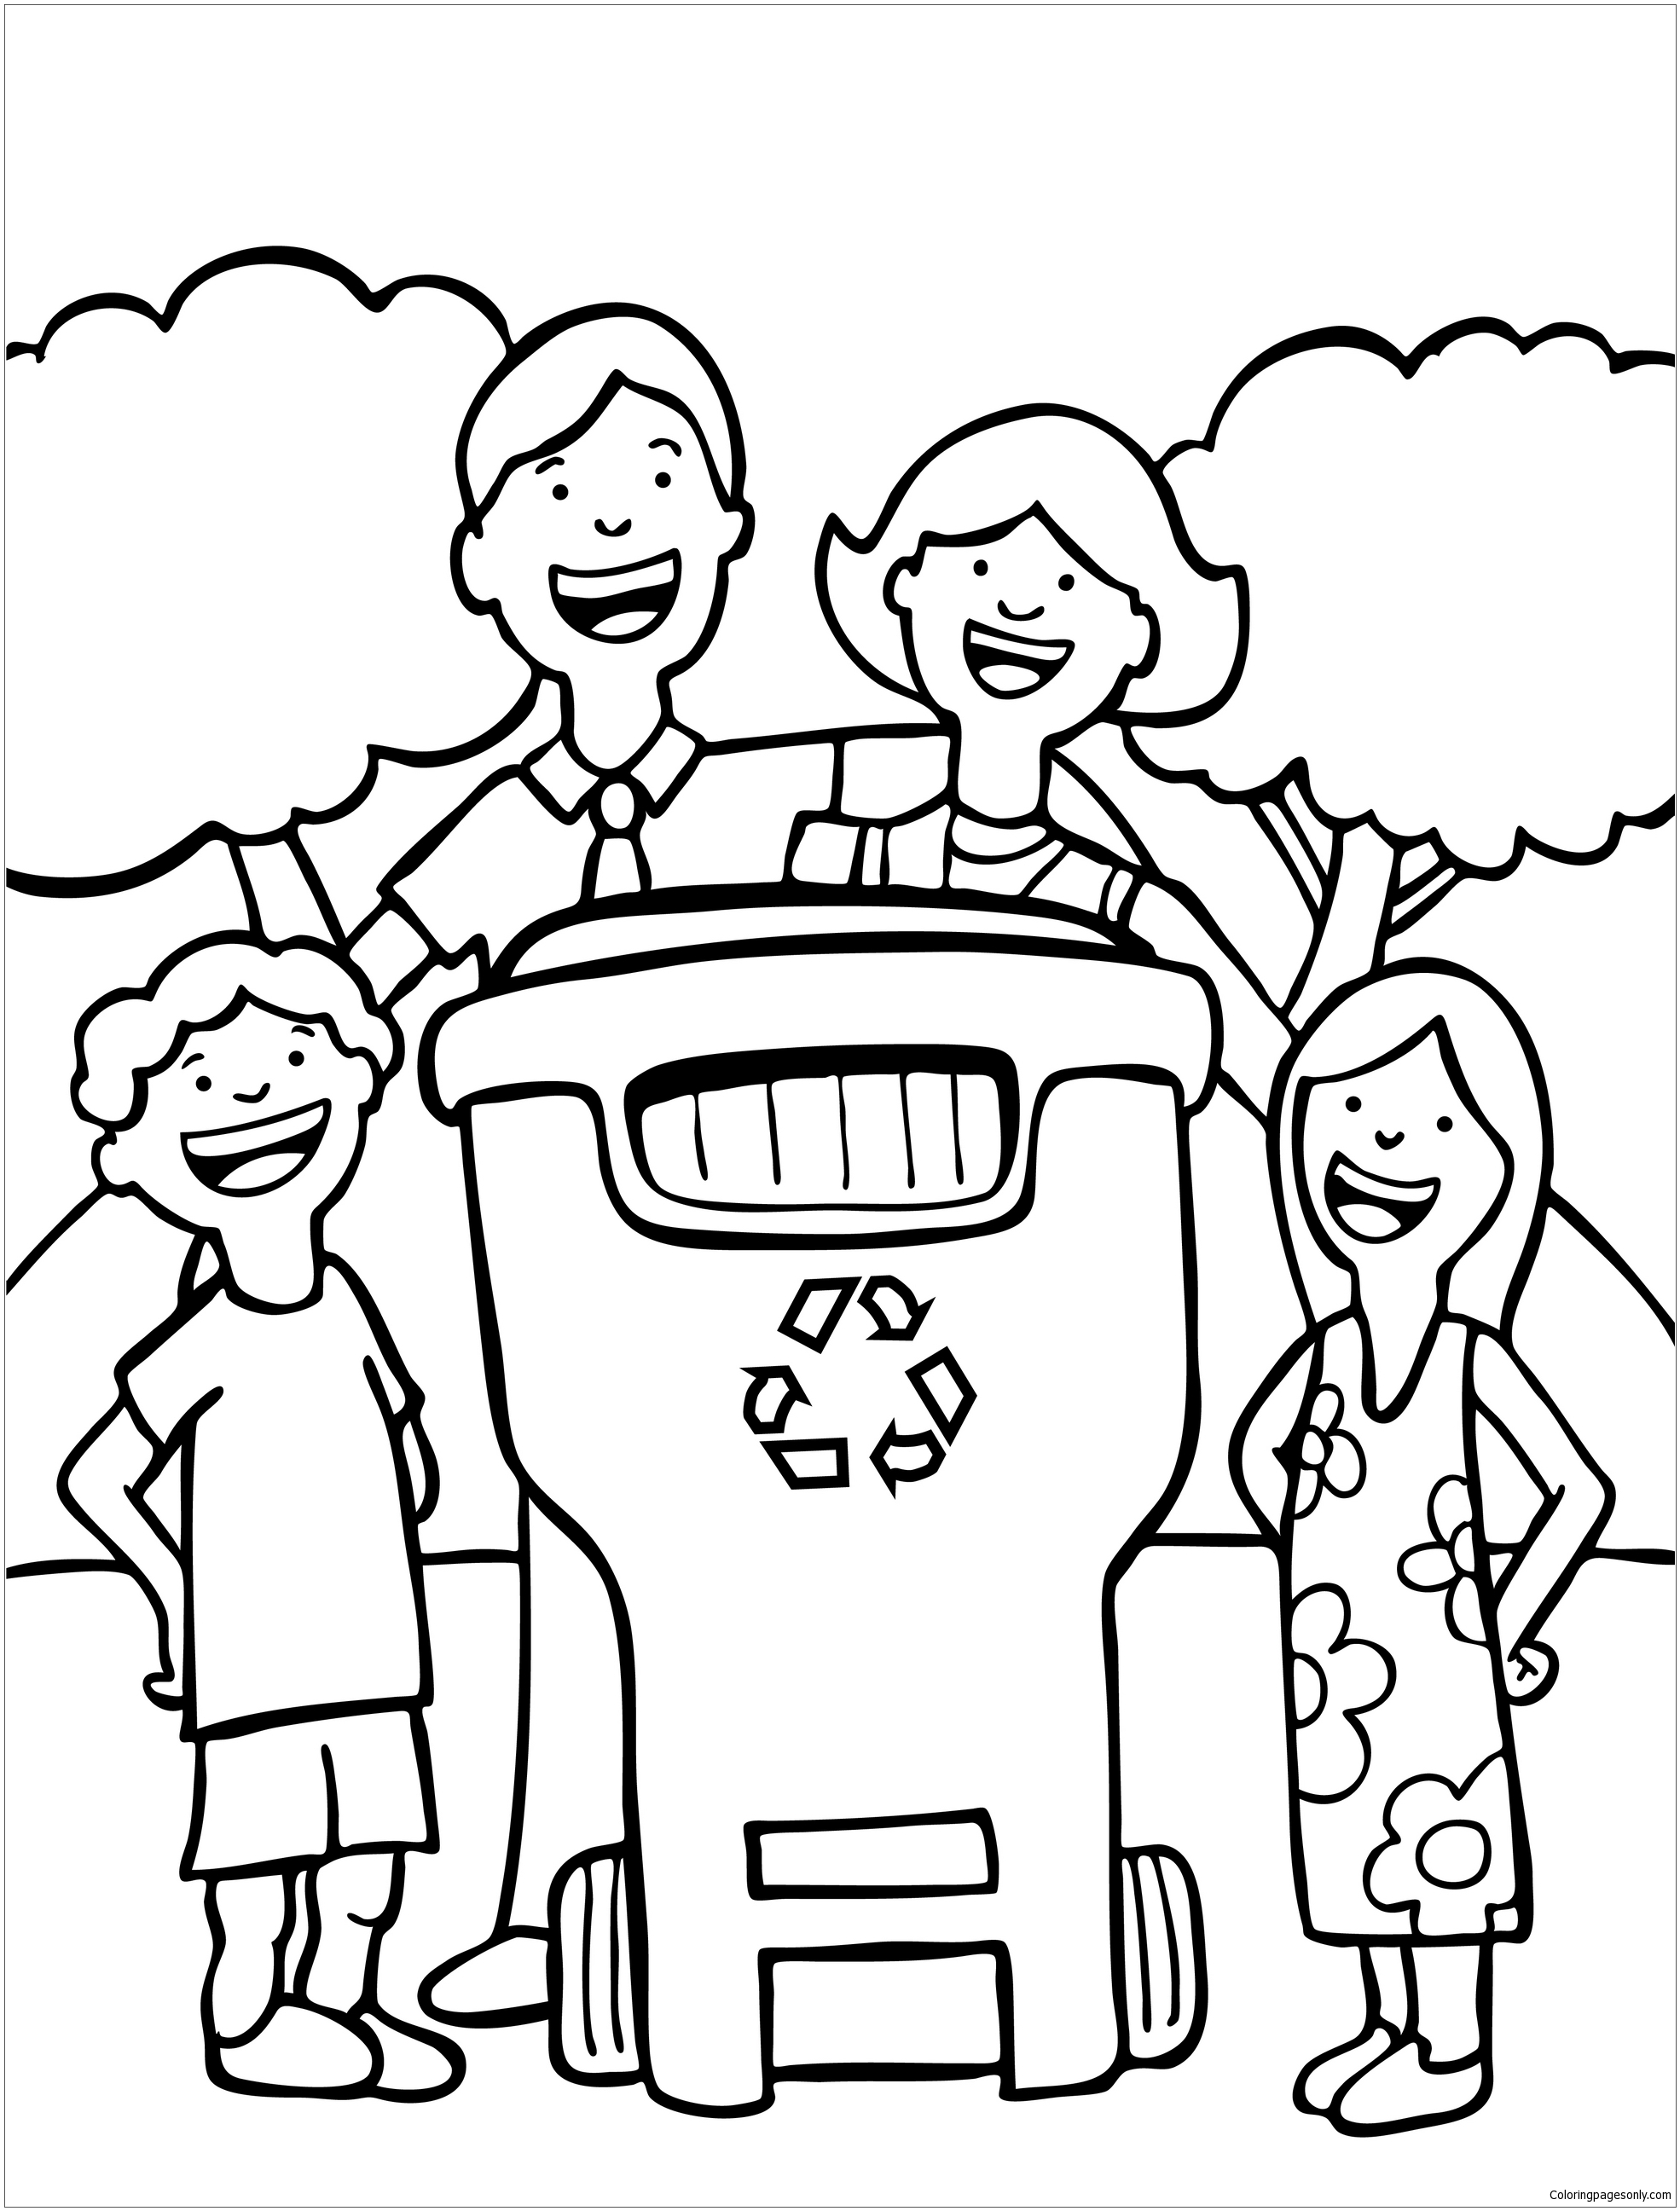 Recycle In Recycling Coloring Page - Free Coloring Pages Online